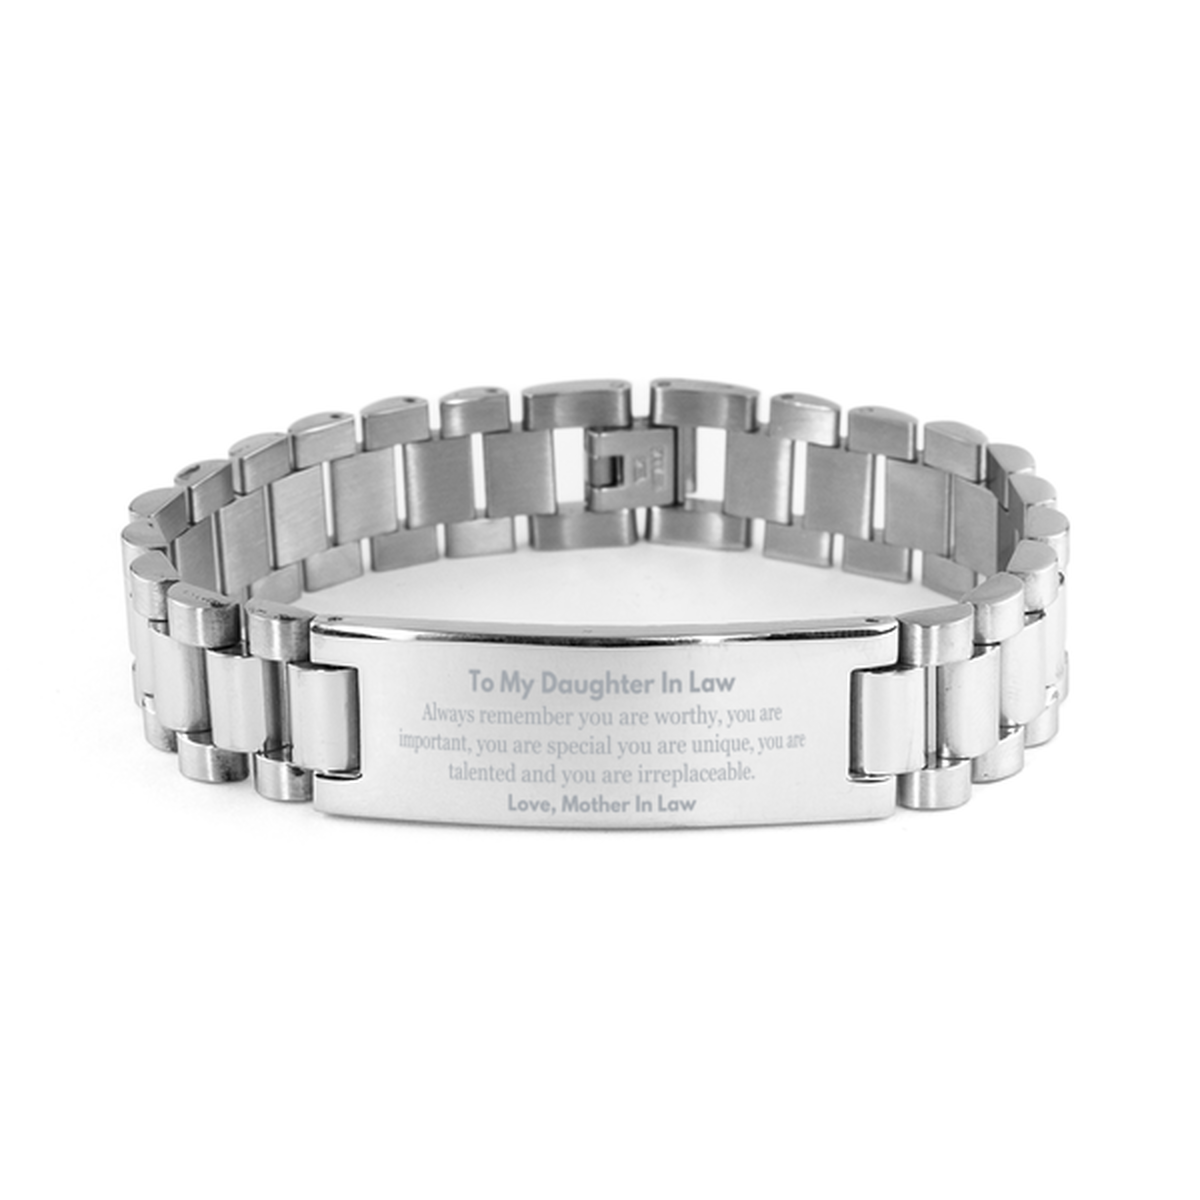 Daughter In Law Birthday Gifts from Mother In Law, Inspirational Ladder Stainless Steel Bracelet for Daughter In Law Christmas Graduation Gifts for Daughter In Law Always remember you are worthy, you are important. Love, Mother In Law